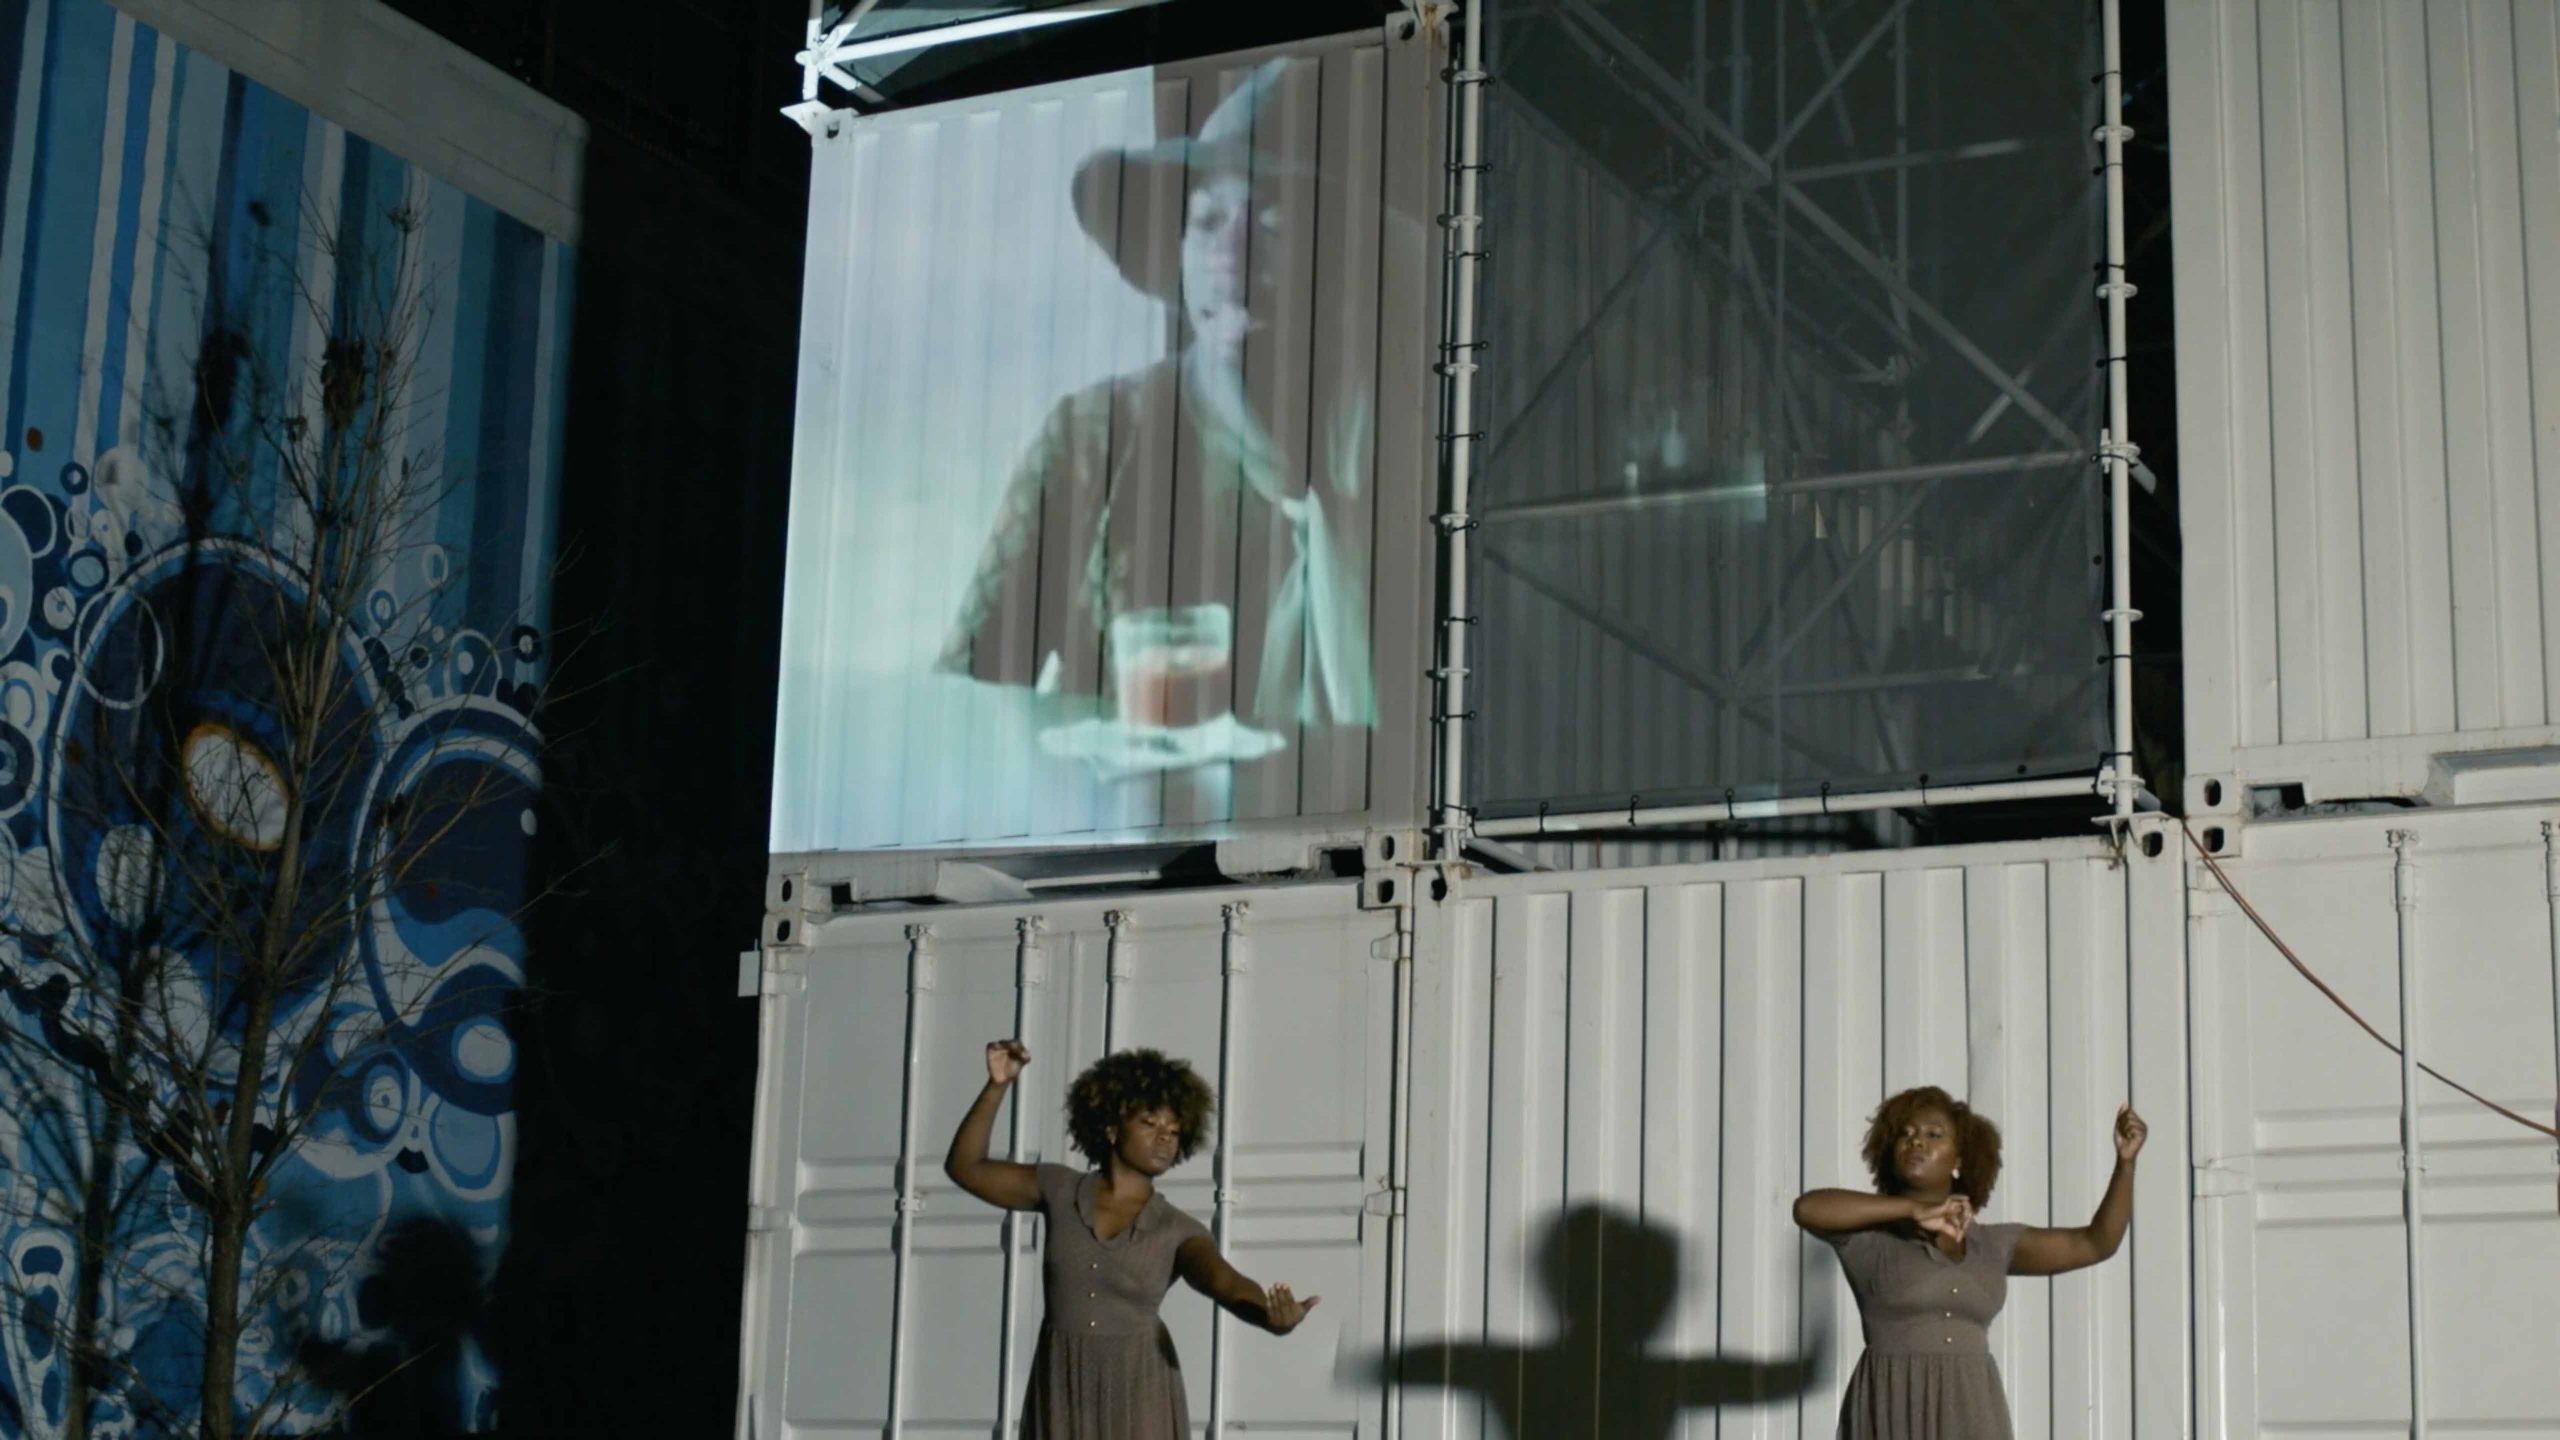 Two dancers dressed alike cast shadows in front of a mural and screen projection.